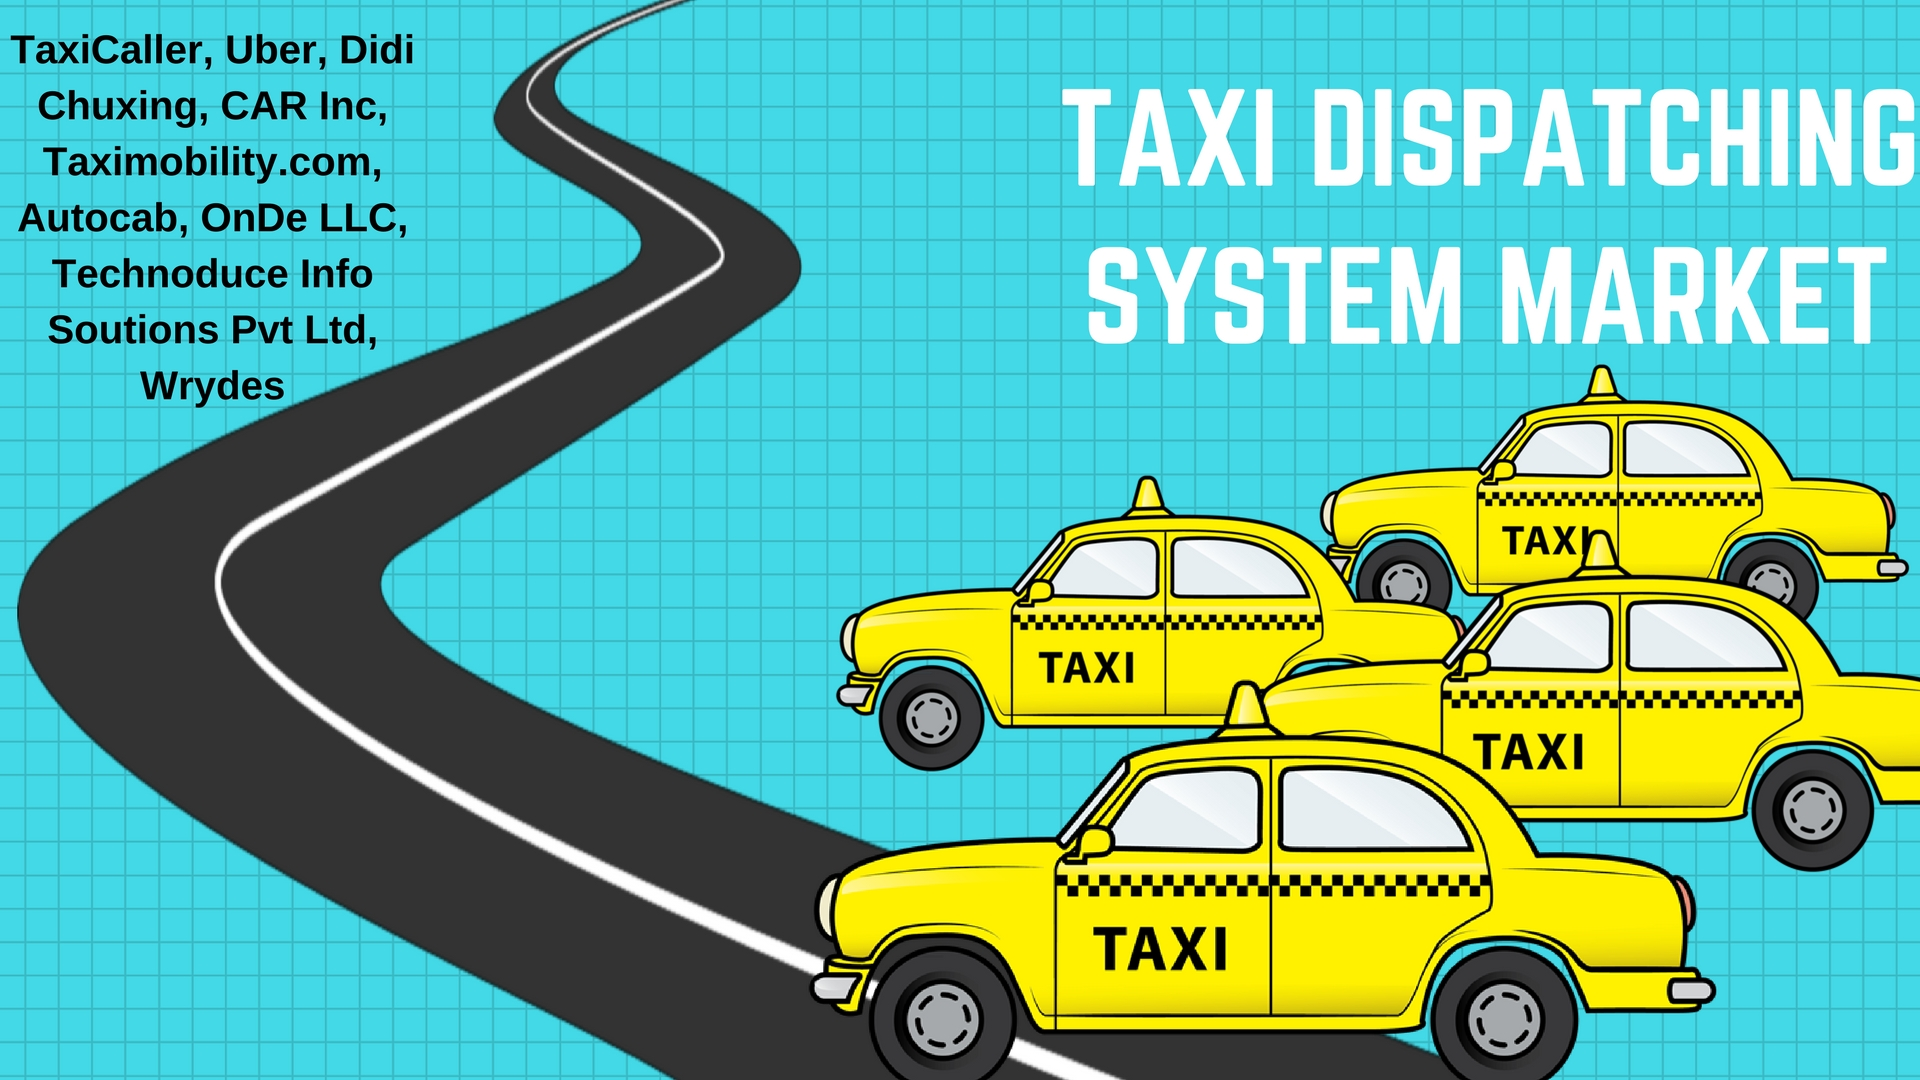 Global Taxi Dispatching System market insights to 2022 profi'